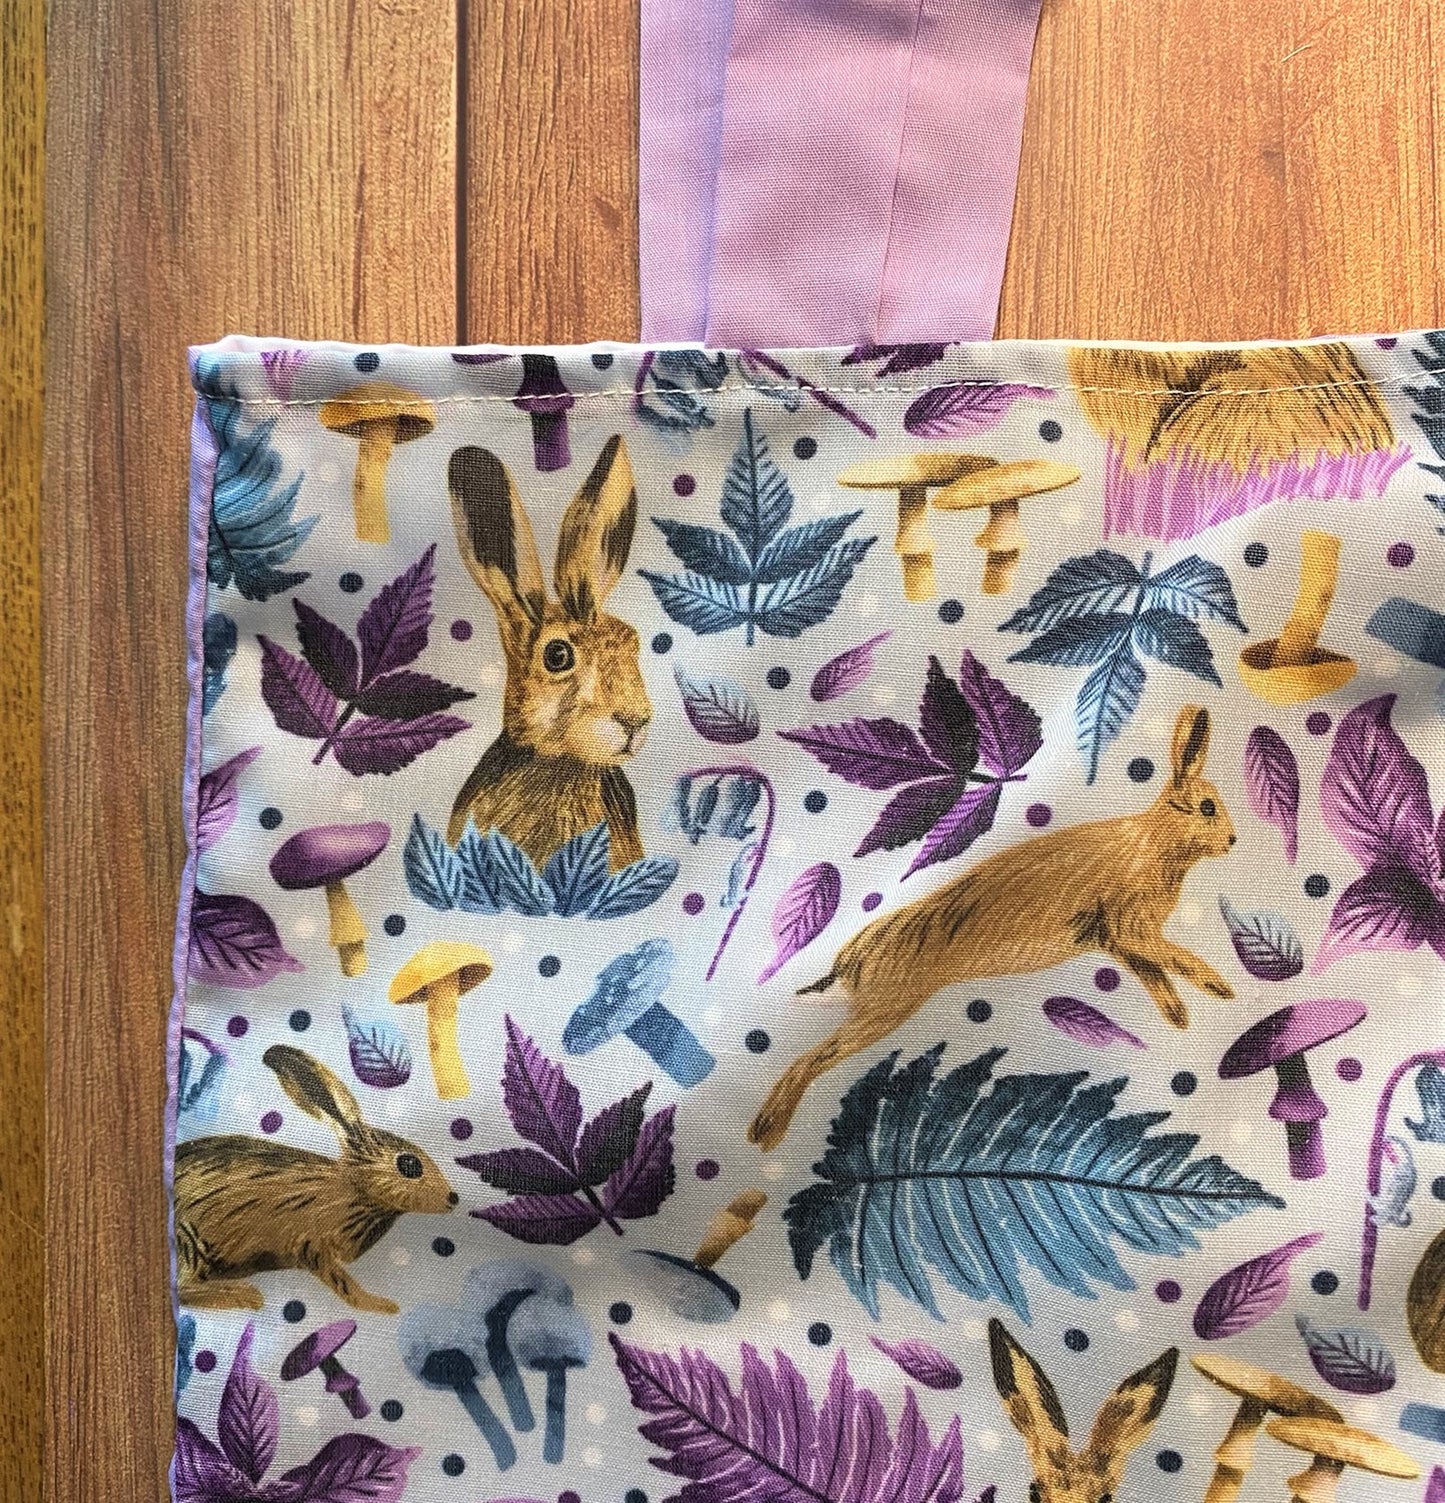 Closeup of the corner of the hare tote showing the surface pattern design with hares and foliage in purple and blue. The purple strap of the tote is also visible and the bag sits on a wooden background.